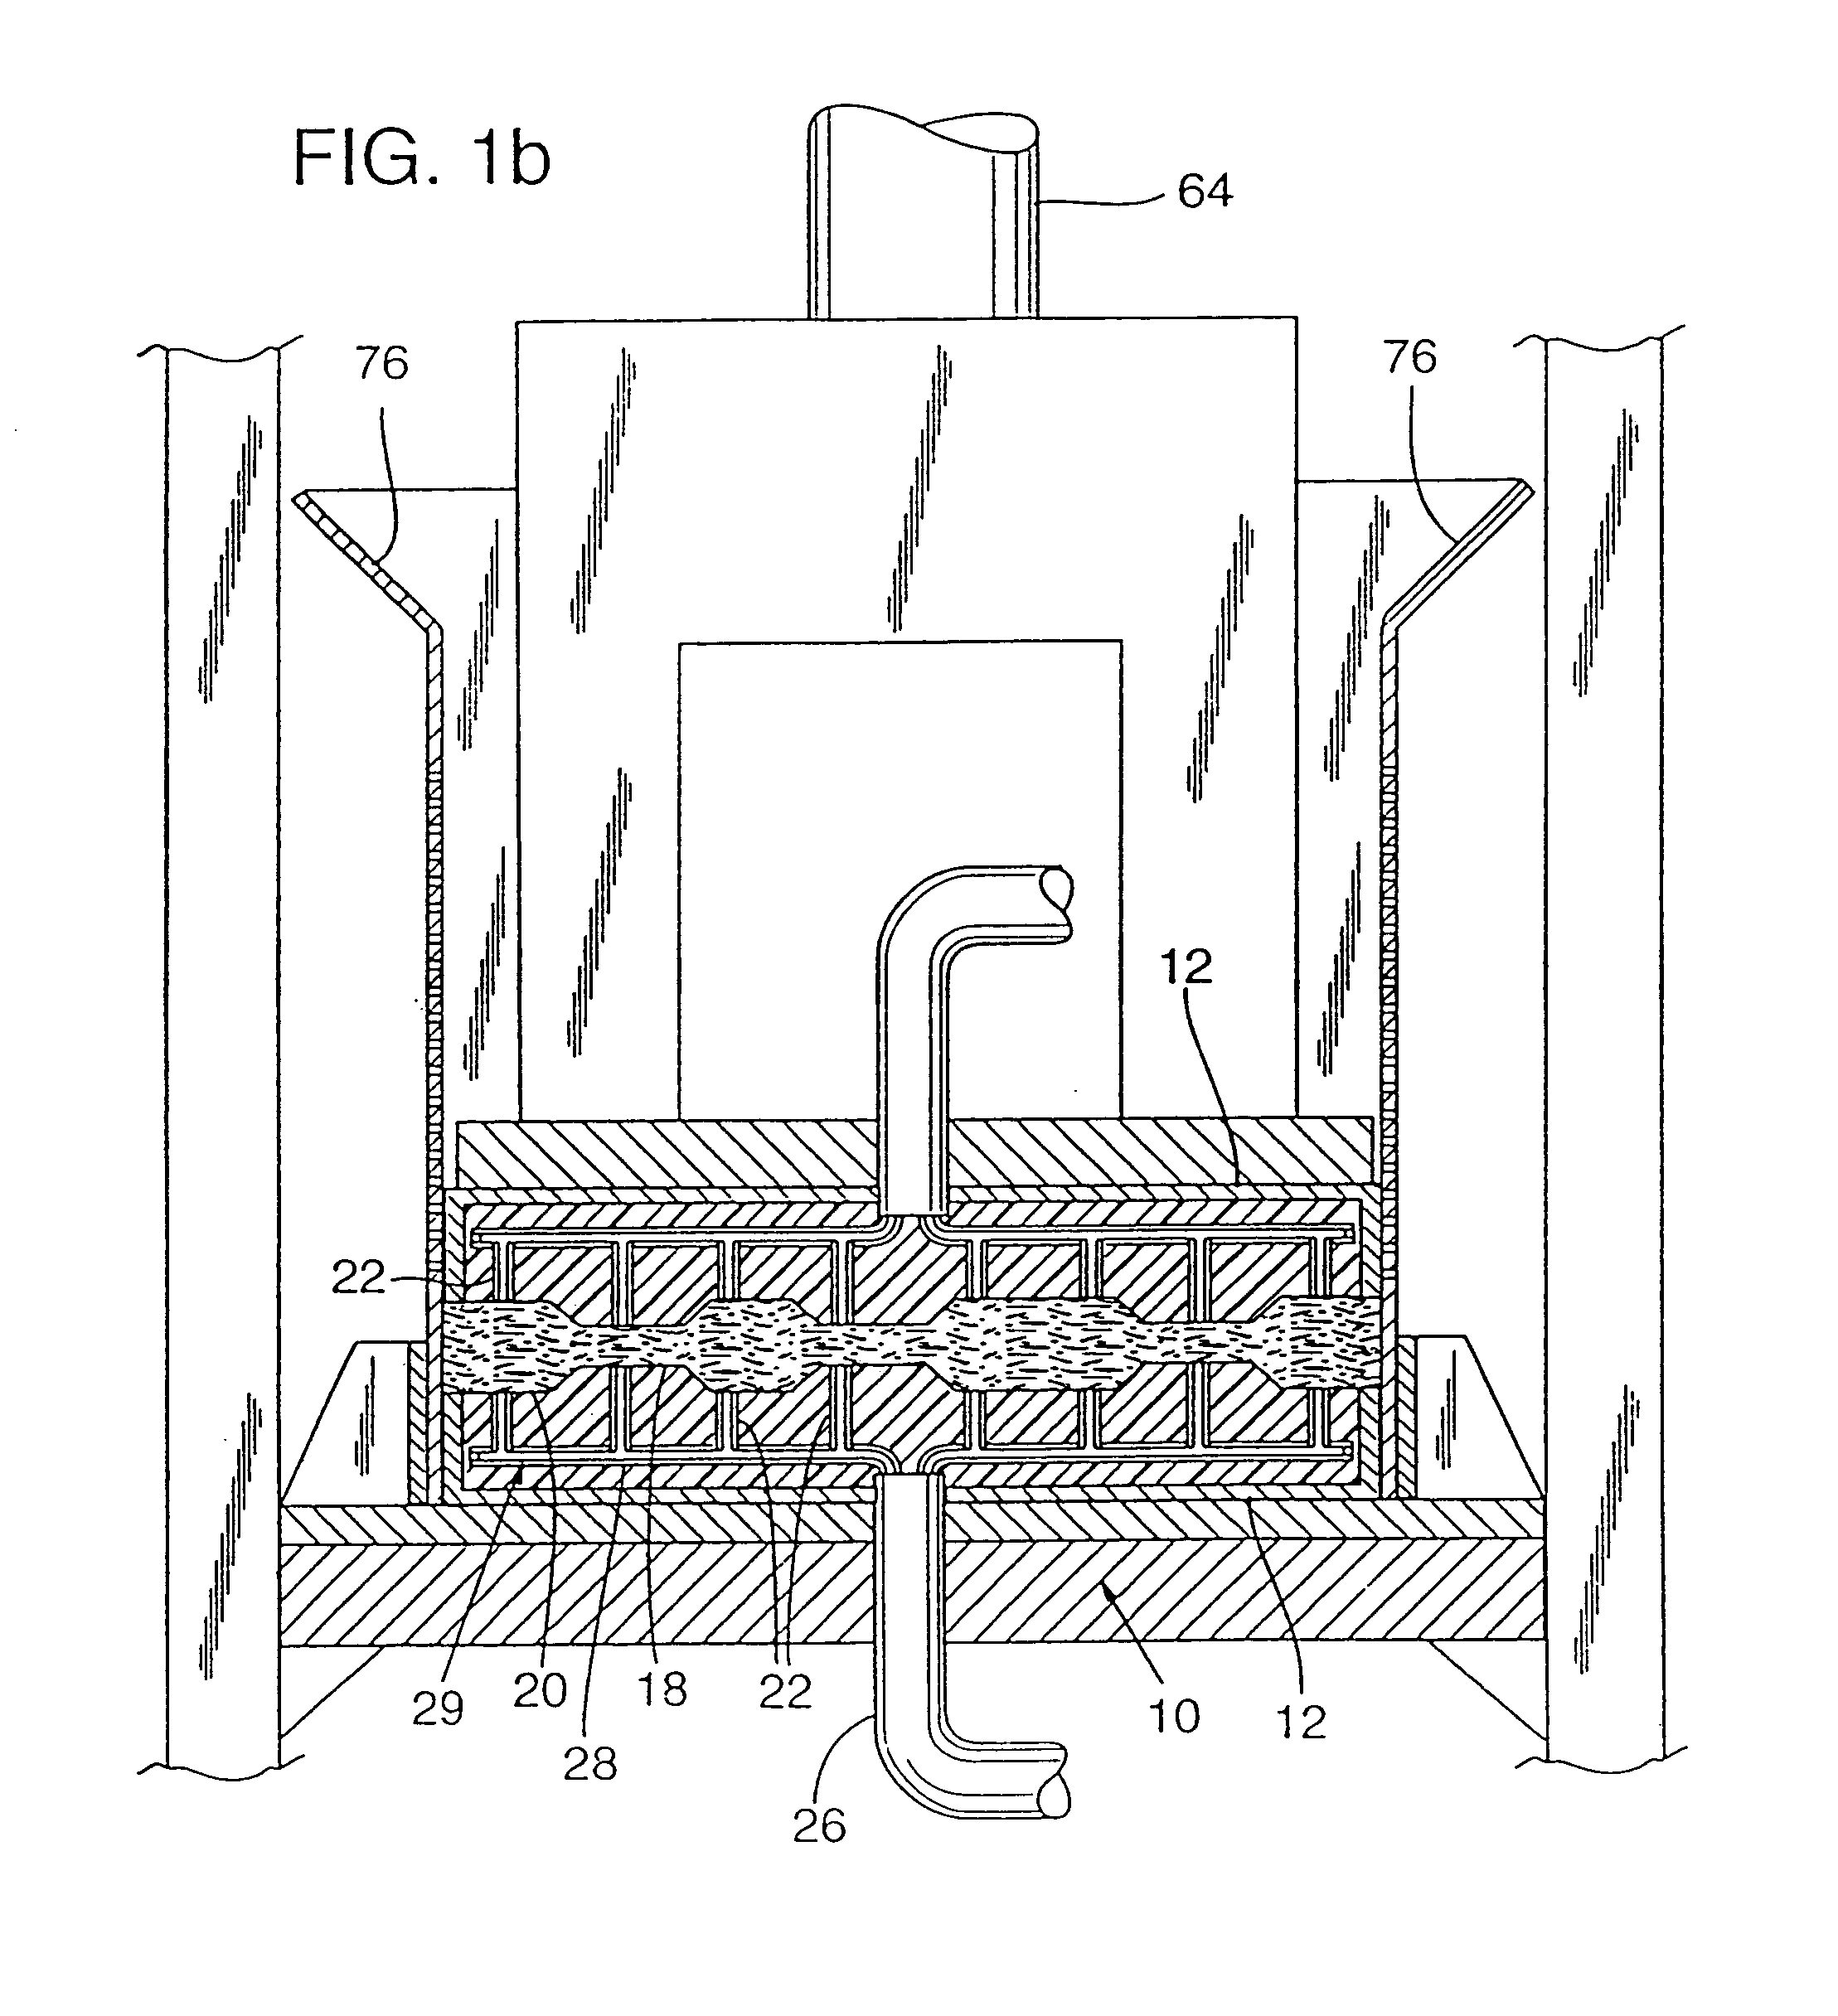 Method of forming a thermoactive binder composite